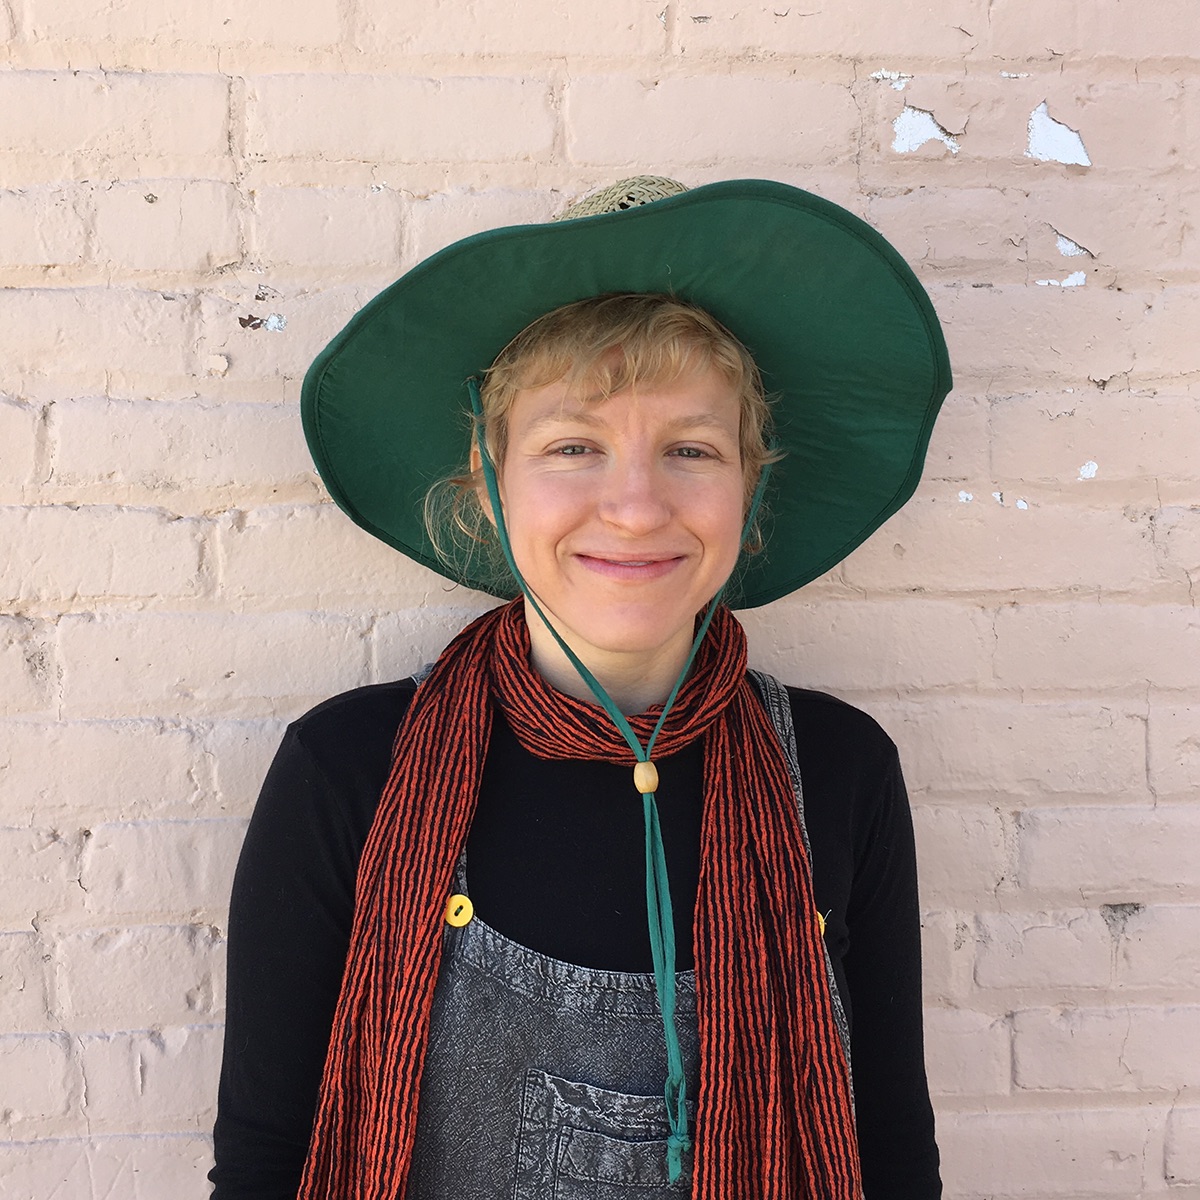 A portrait shot of a white nonbinary person with short blonde hair in their thirties, standing and smiling against a beige brick wall, wearing a hat with a big green rim, overalls, and a black and orange scarf.